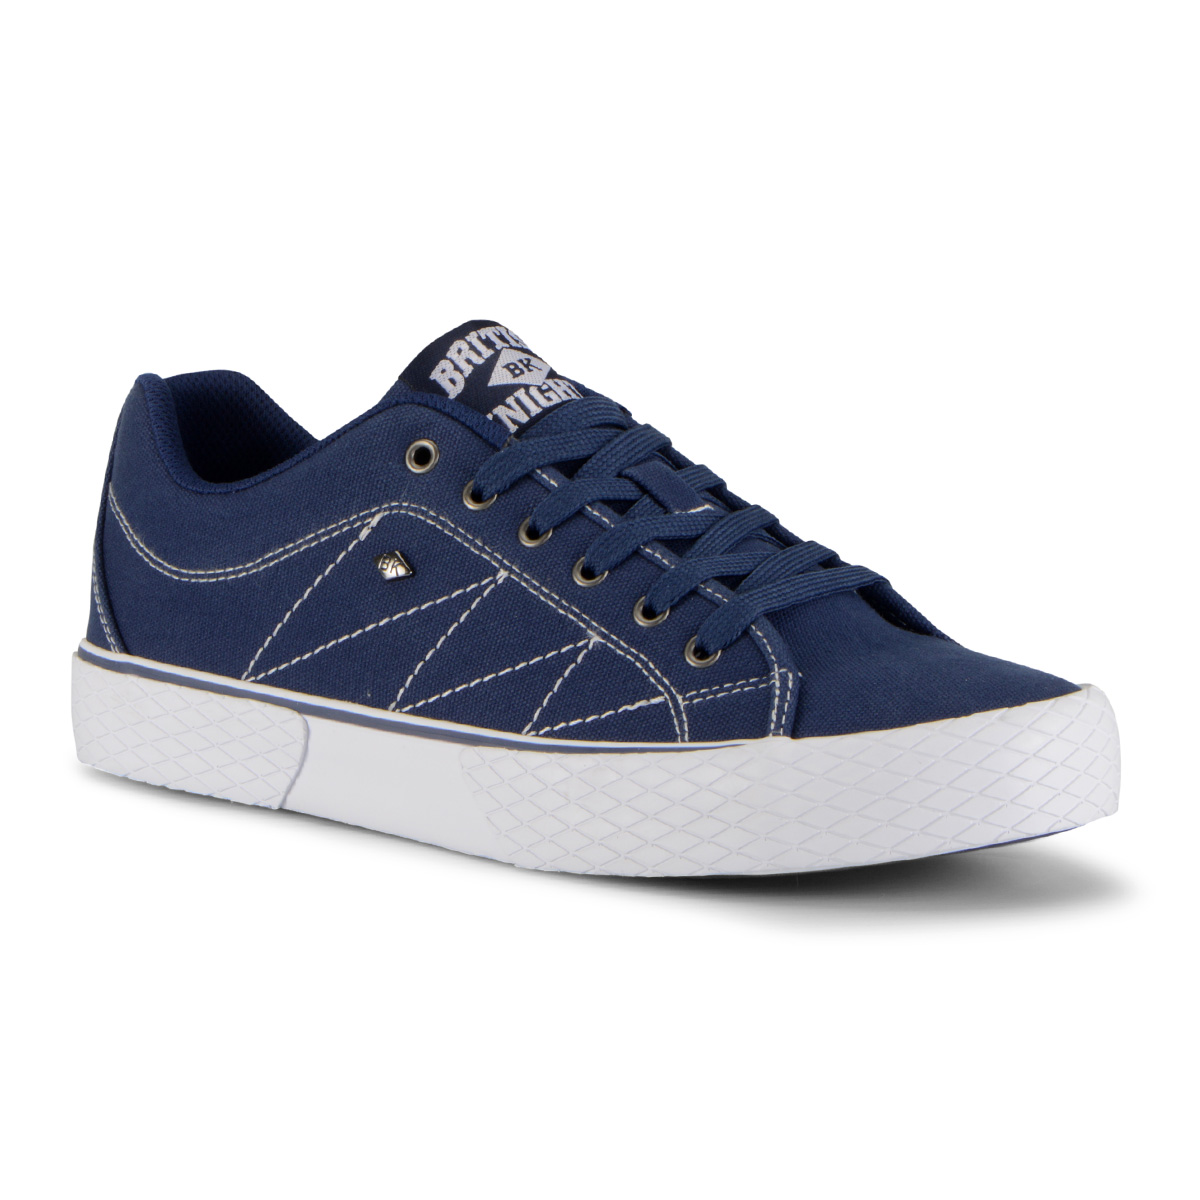 British Knights Men's Vulture 2 Canvas Sneaker Shoes - image 1 of 7